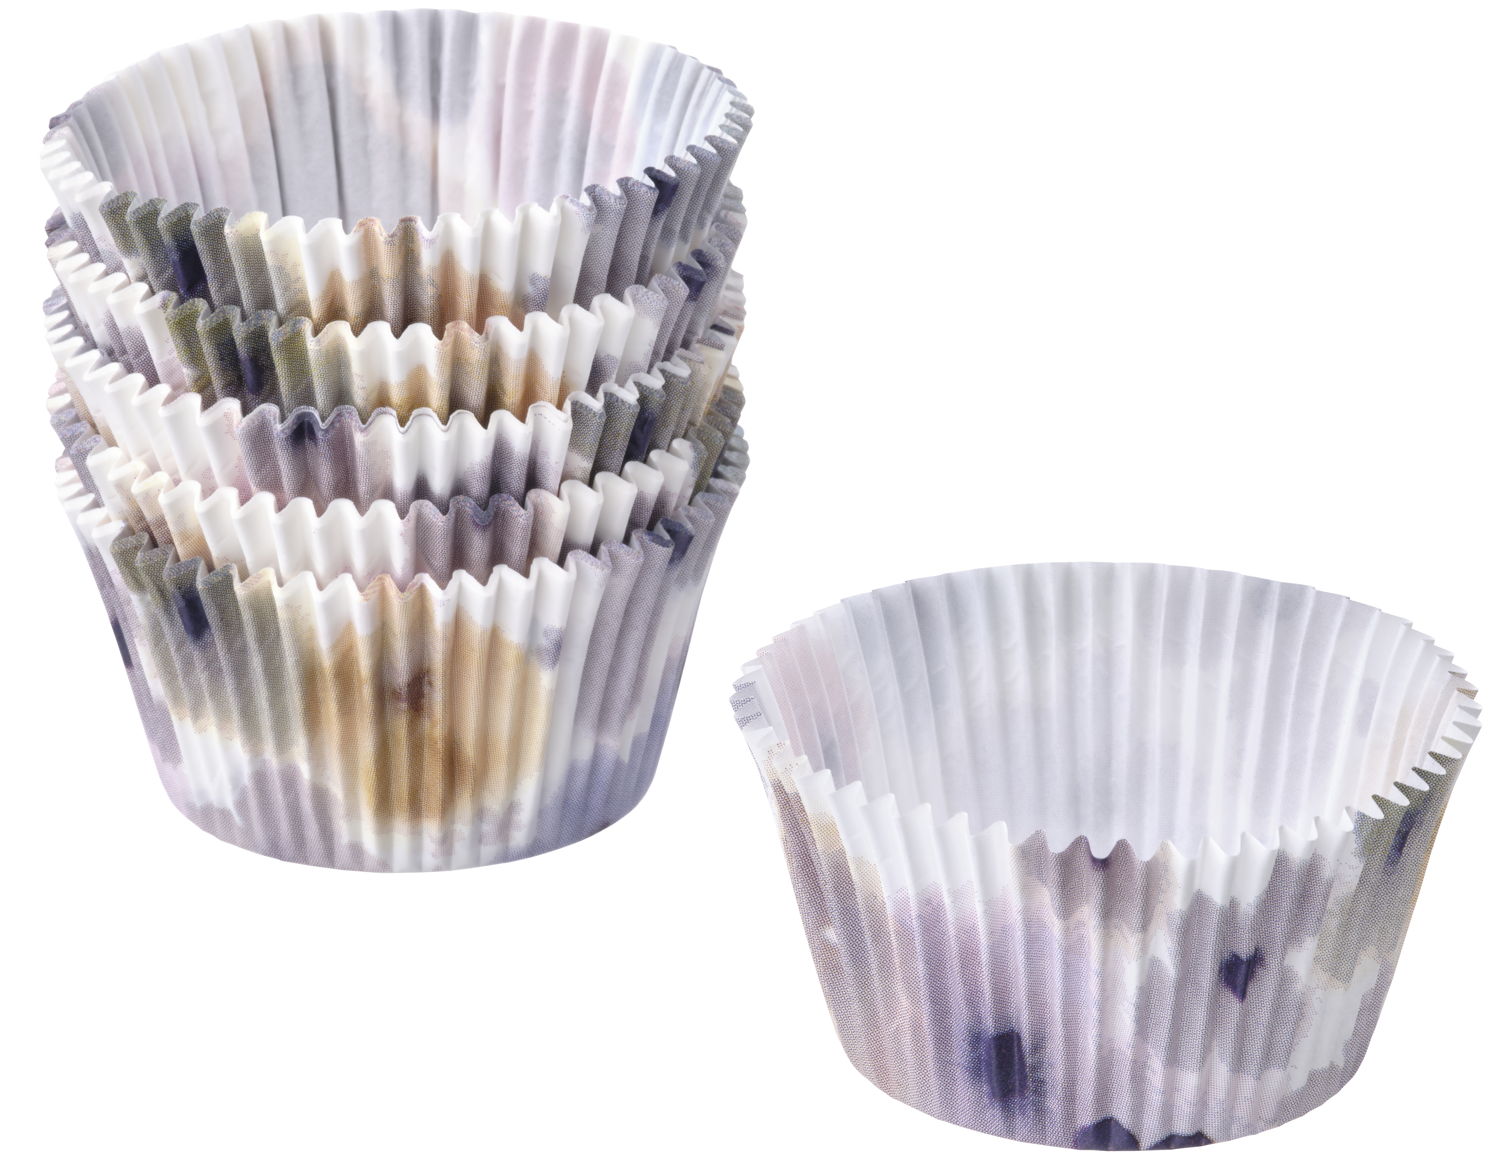 IKEA_April News FY23_SOMMARFLOX baking cup €1,49:65 pack_PE889180